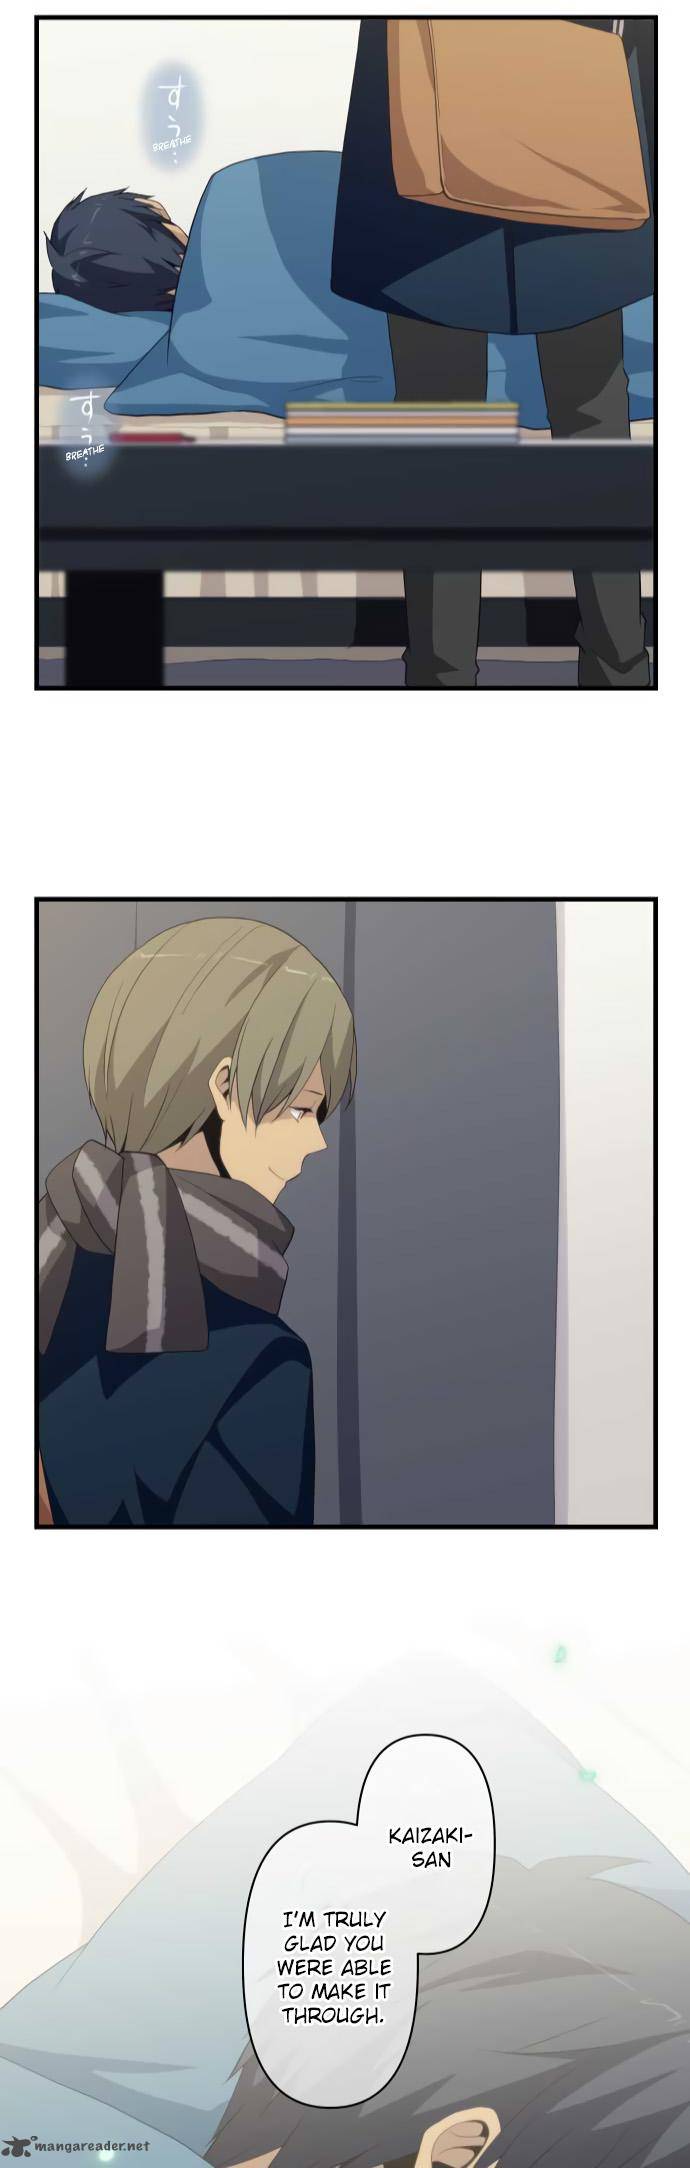 Relife 214 23